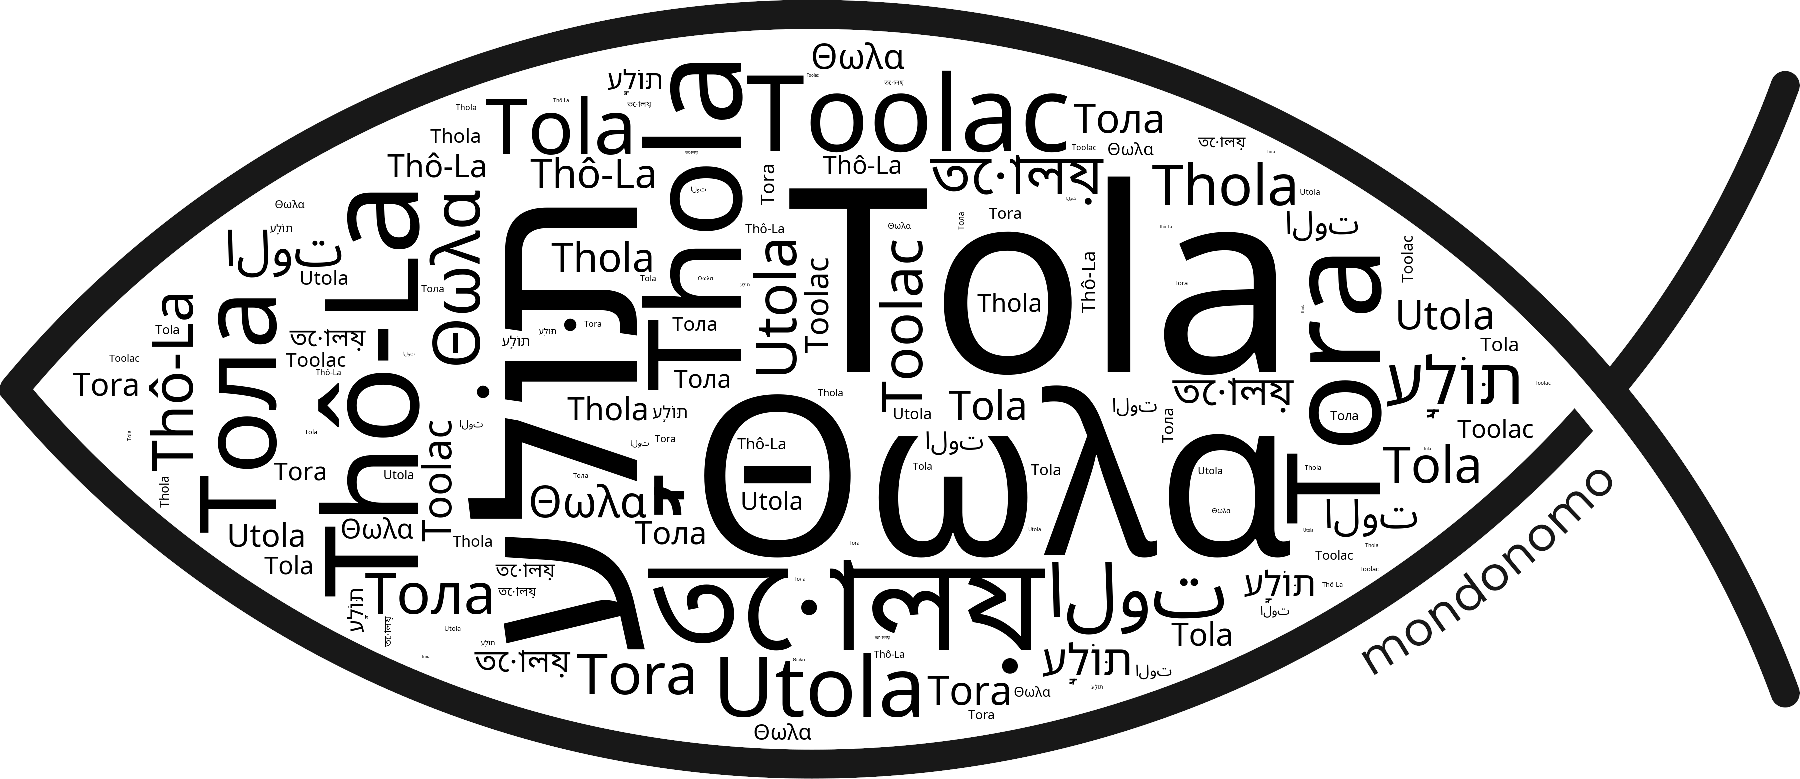 Name Tola in the world's Bibles